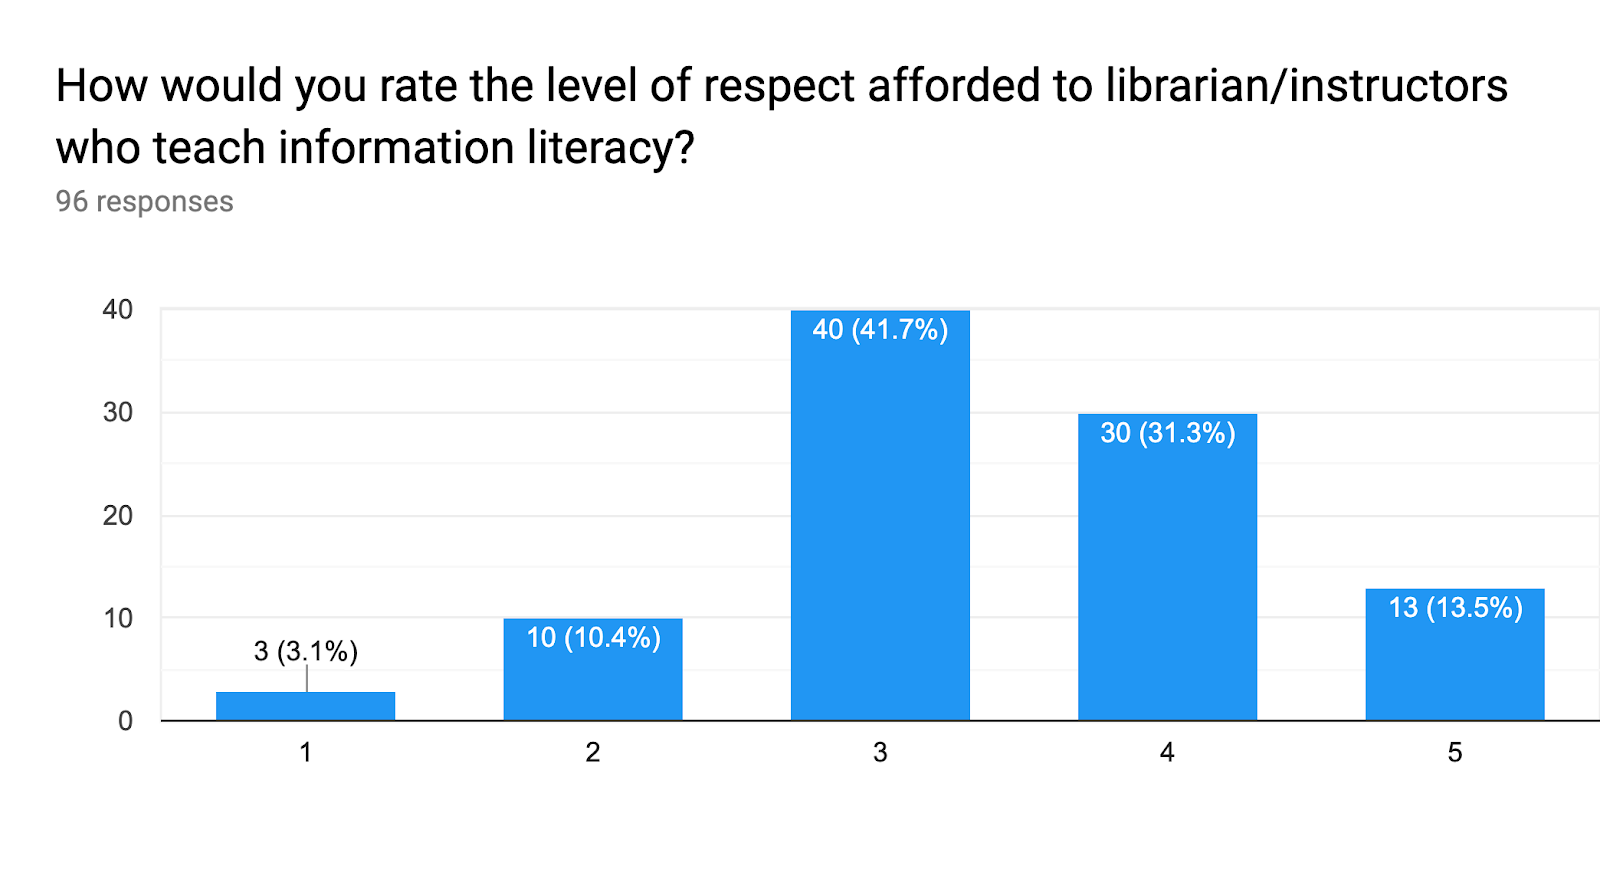 Forms response chart. Question title: How would you rate the level of respect afforded to librarian/instructors who teach information literacy?. Number of responses: 96 responses.